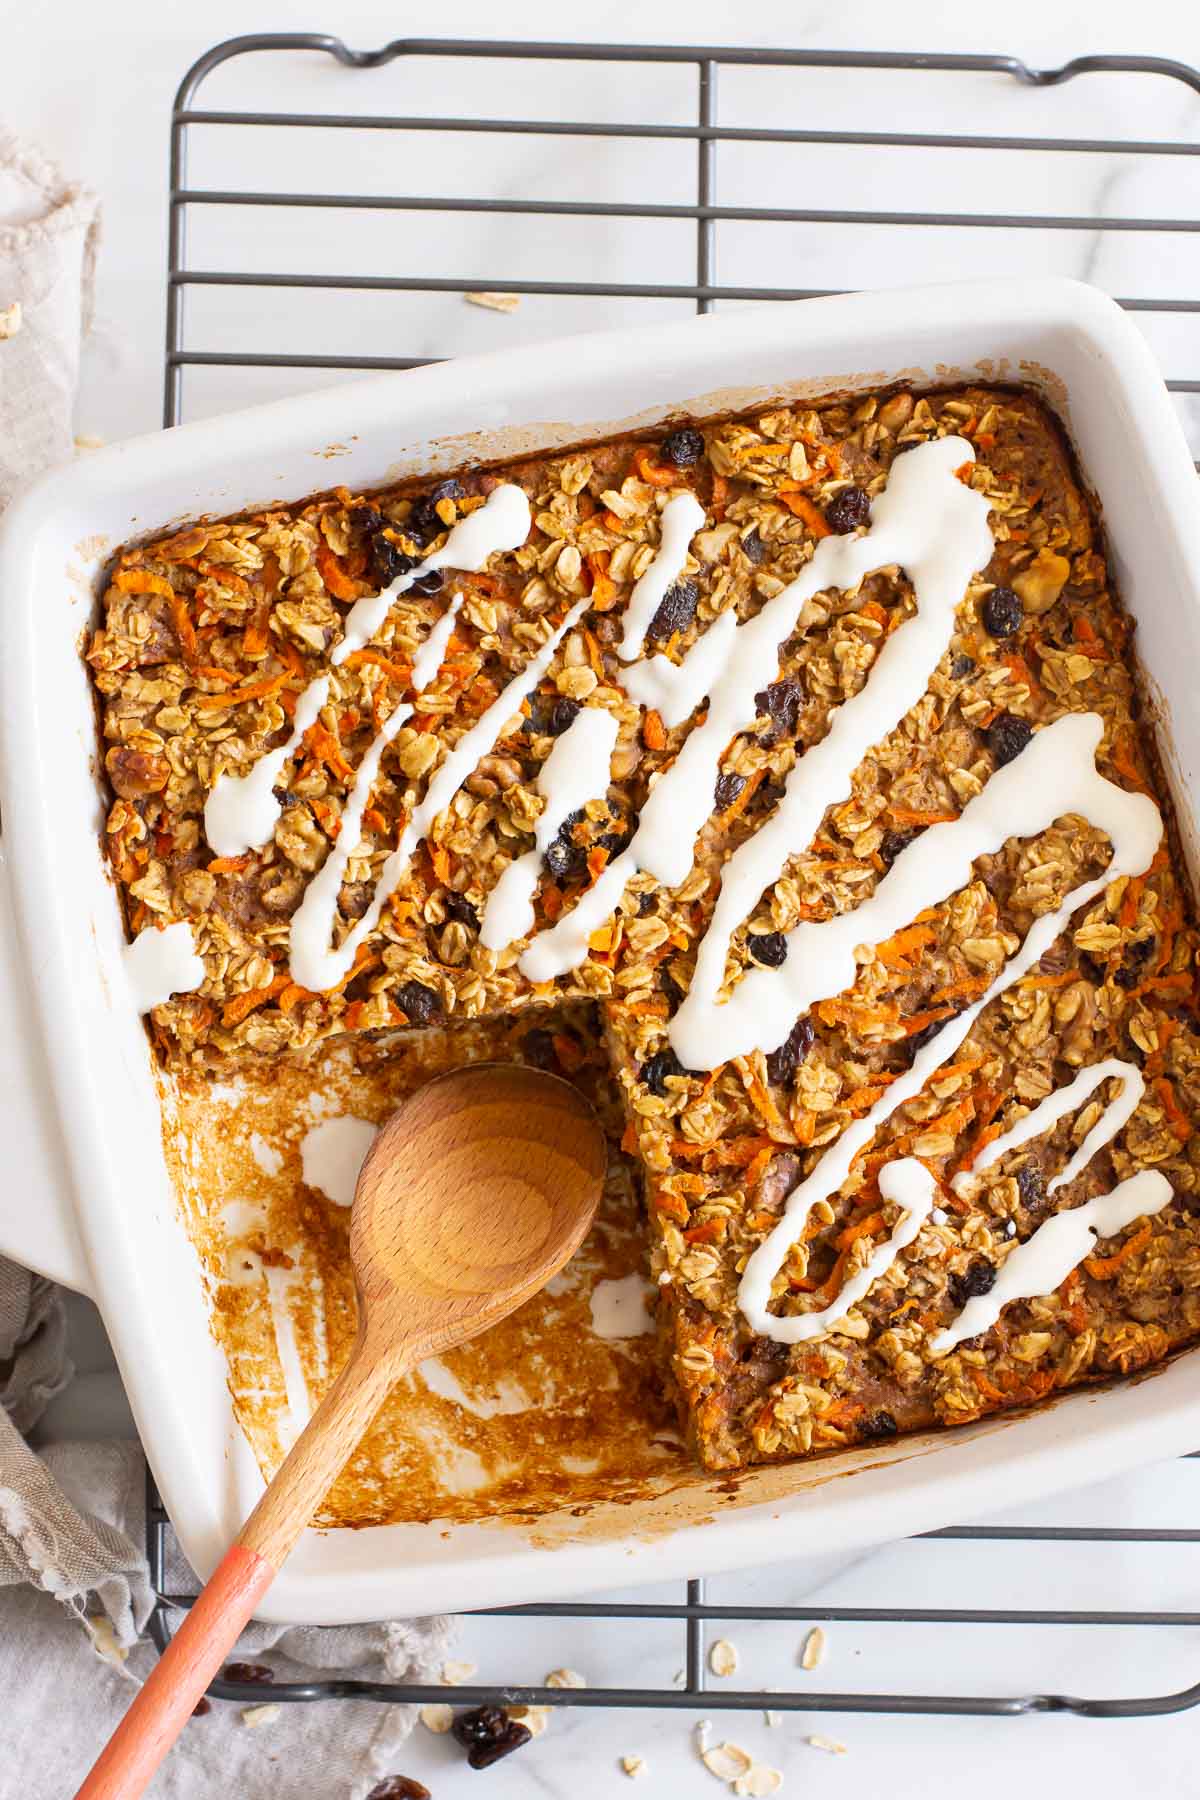 Healthy carrot cake baked oatmeal in baking dish on wire rack.